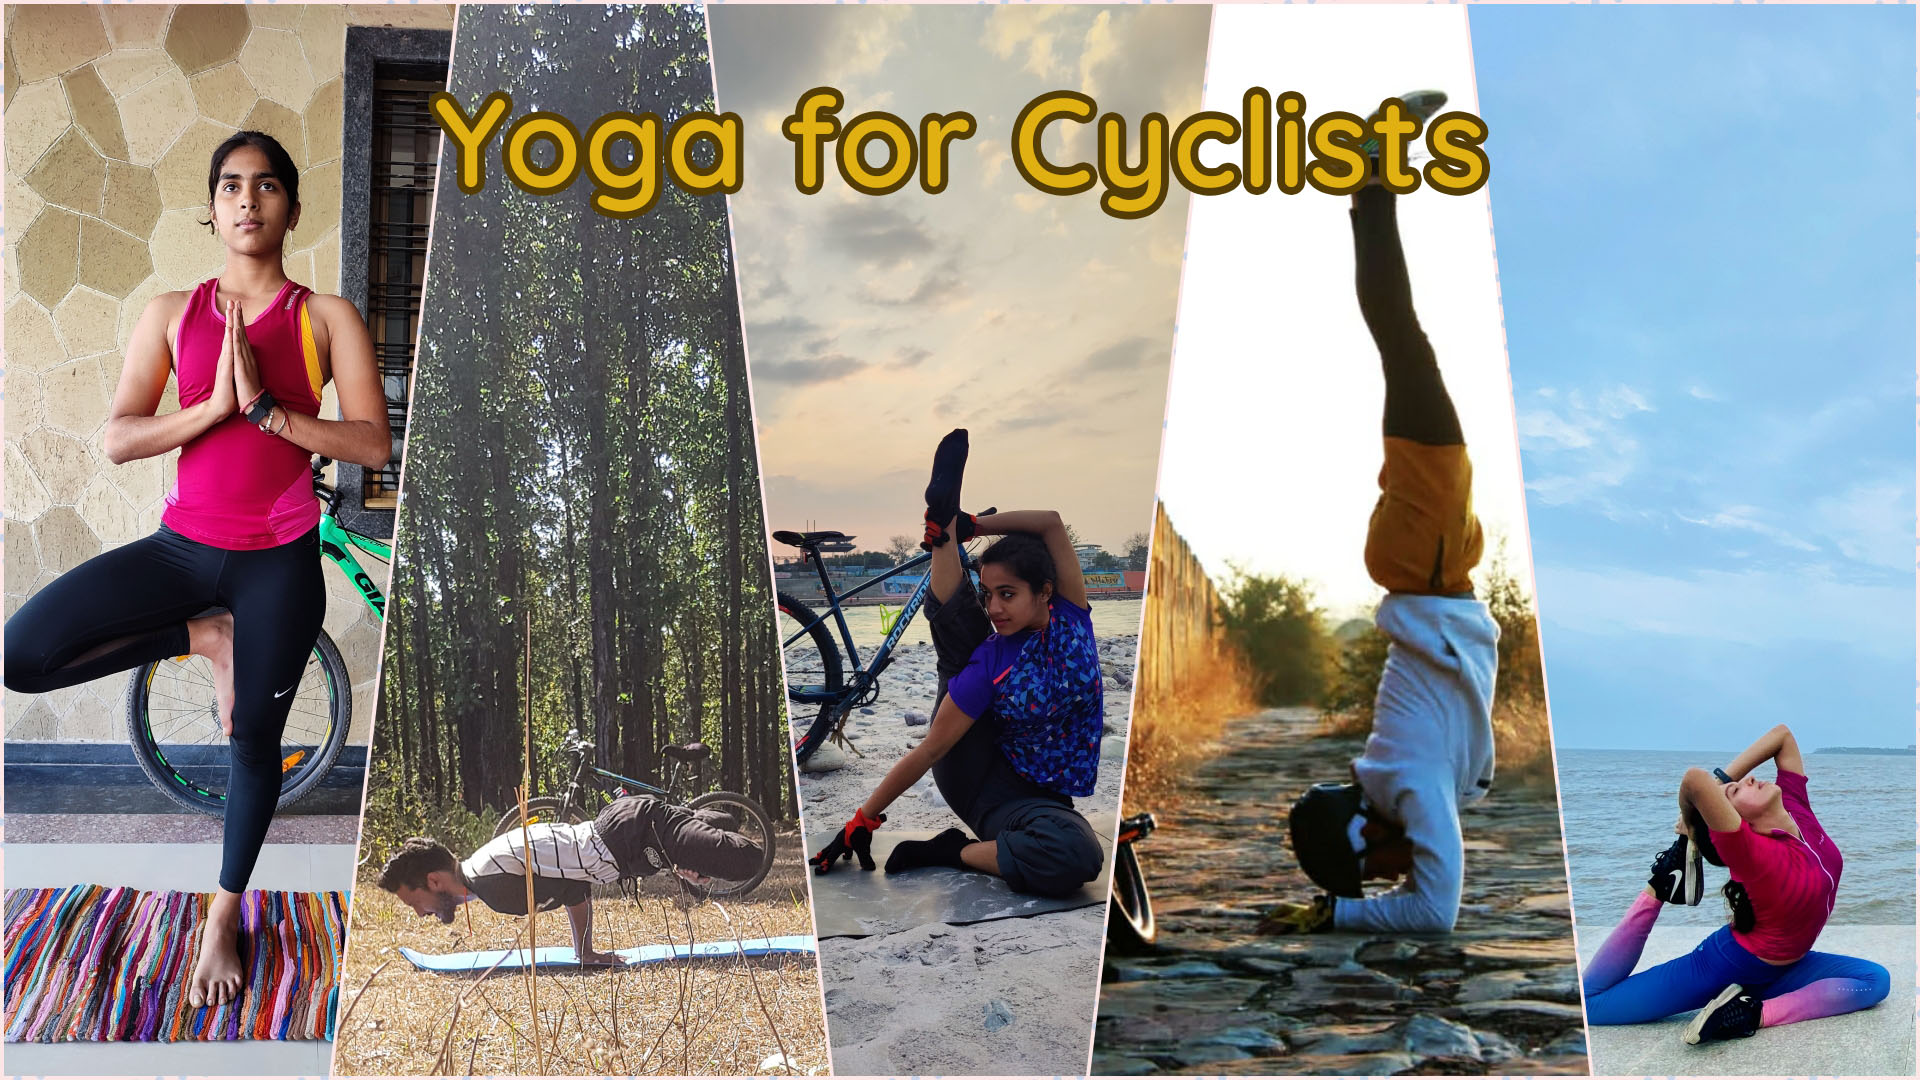 Yoga for cyclists: Belly twist pose by Total Women's Cycling 